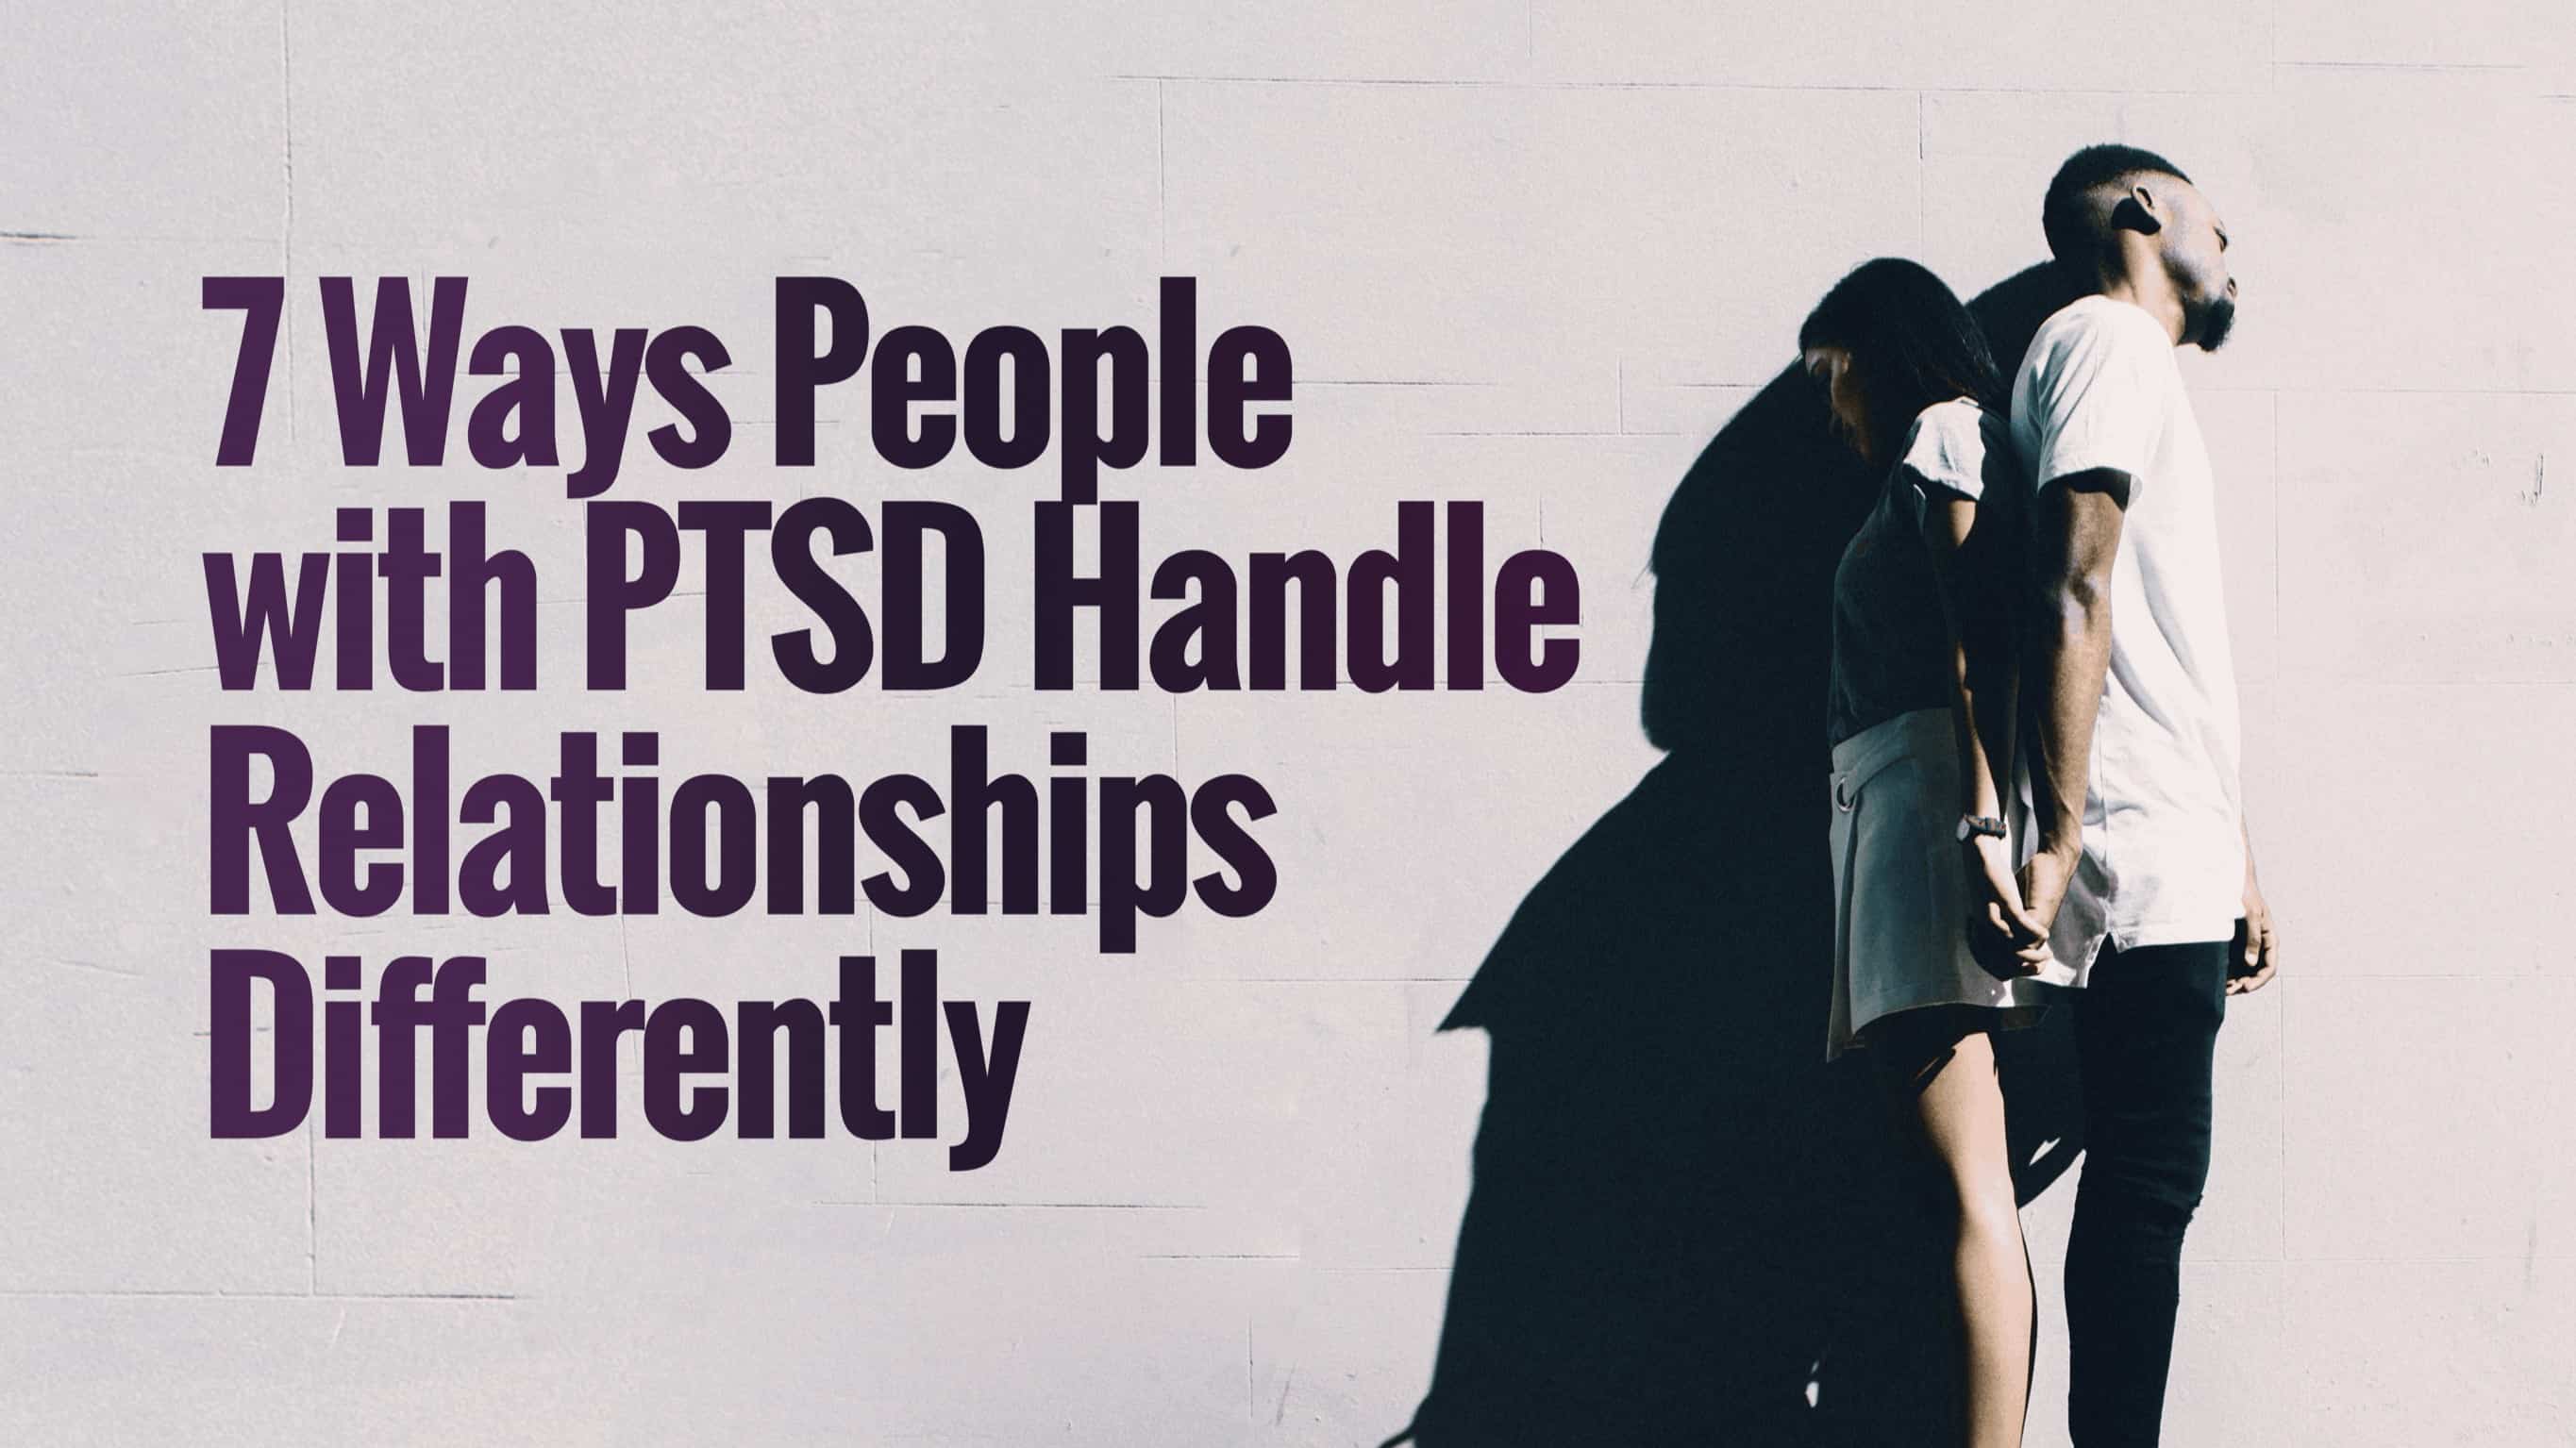 ptsd and relationships